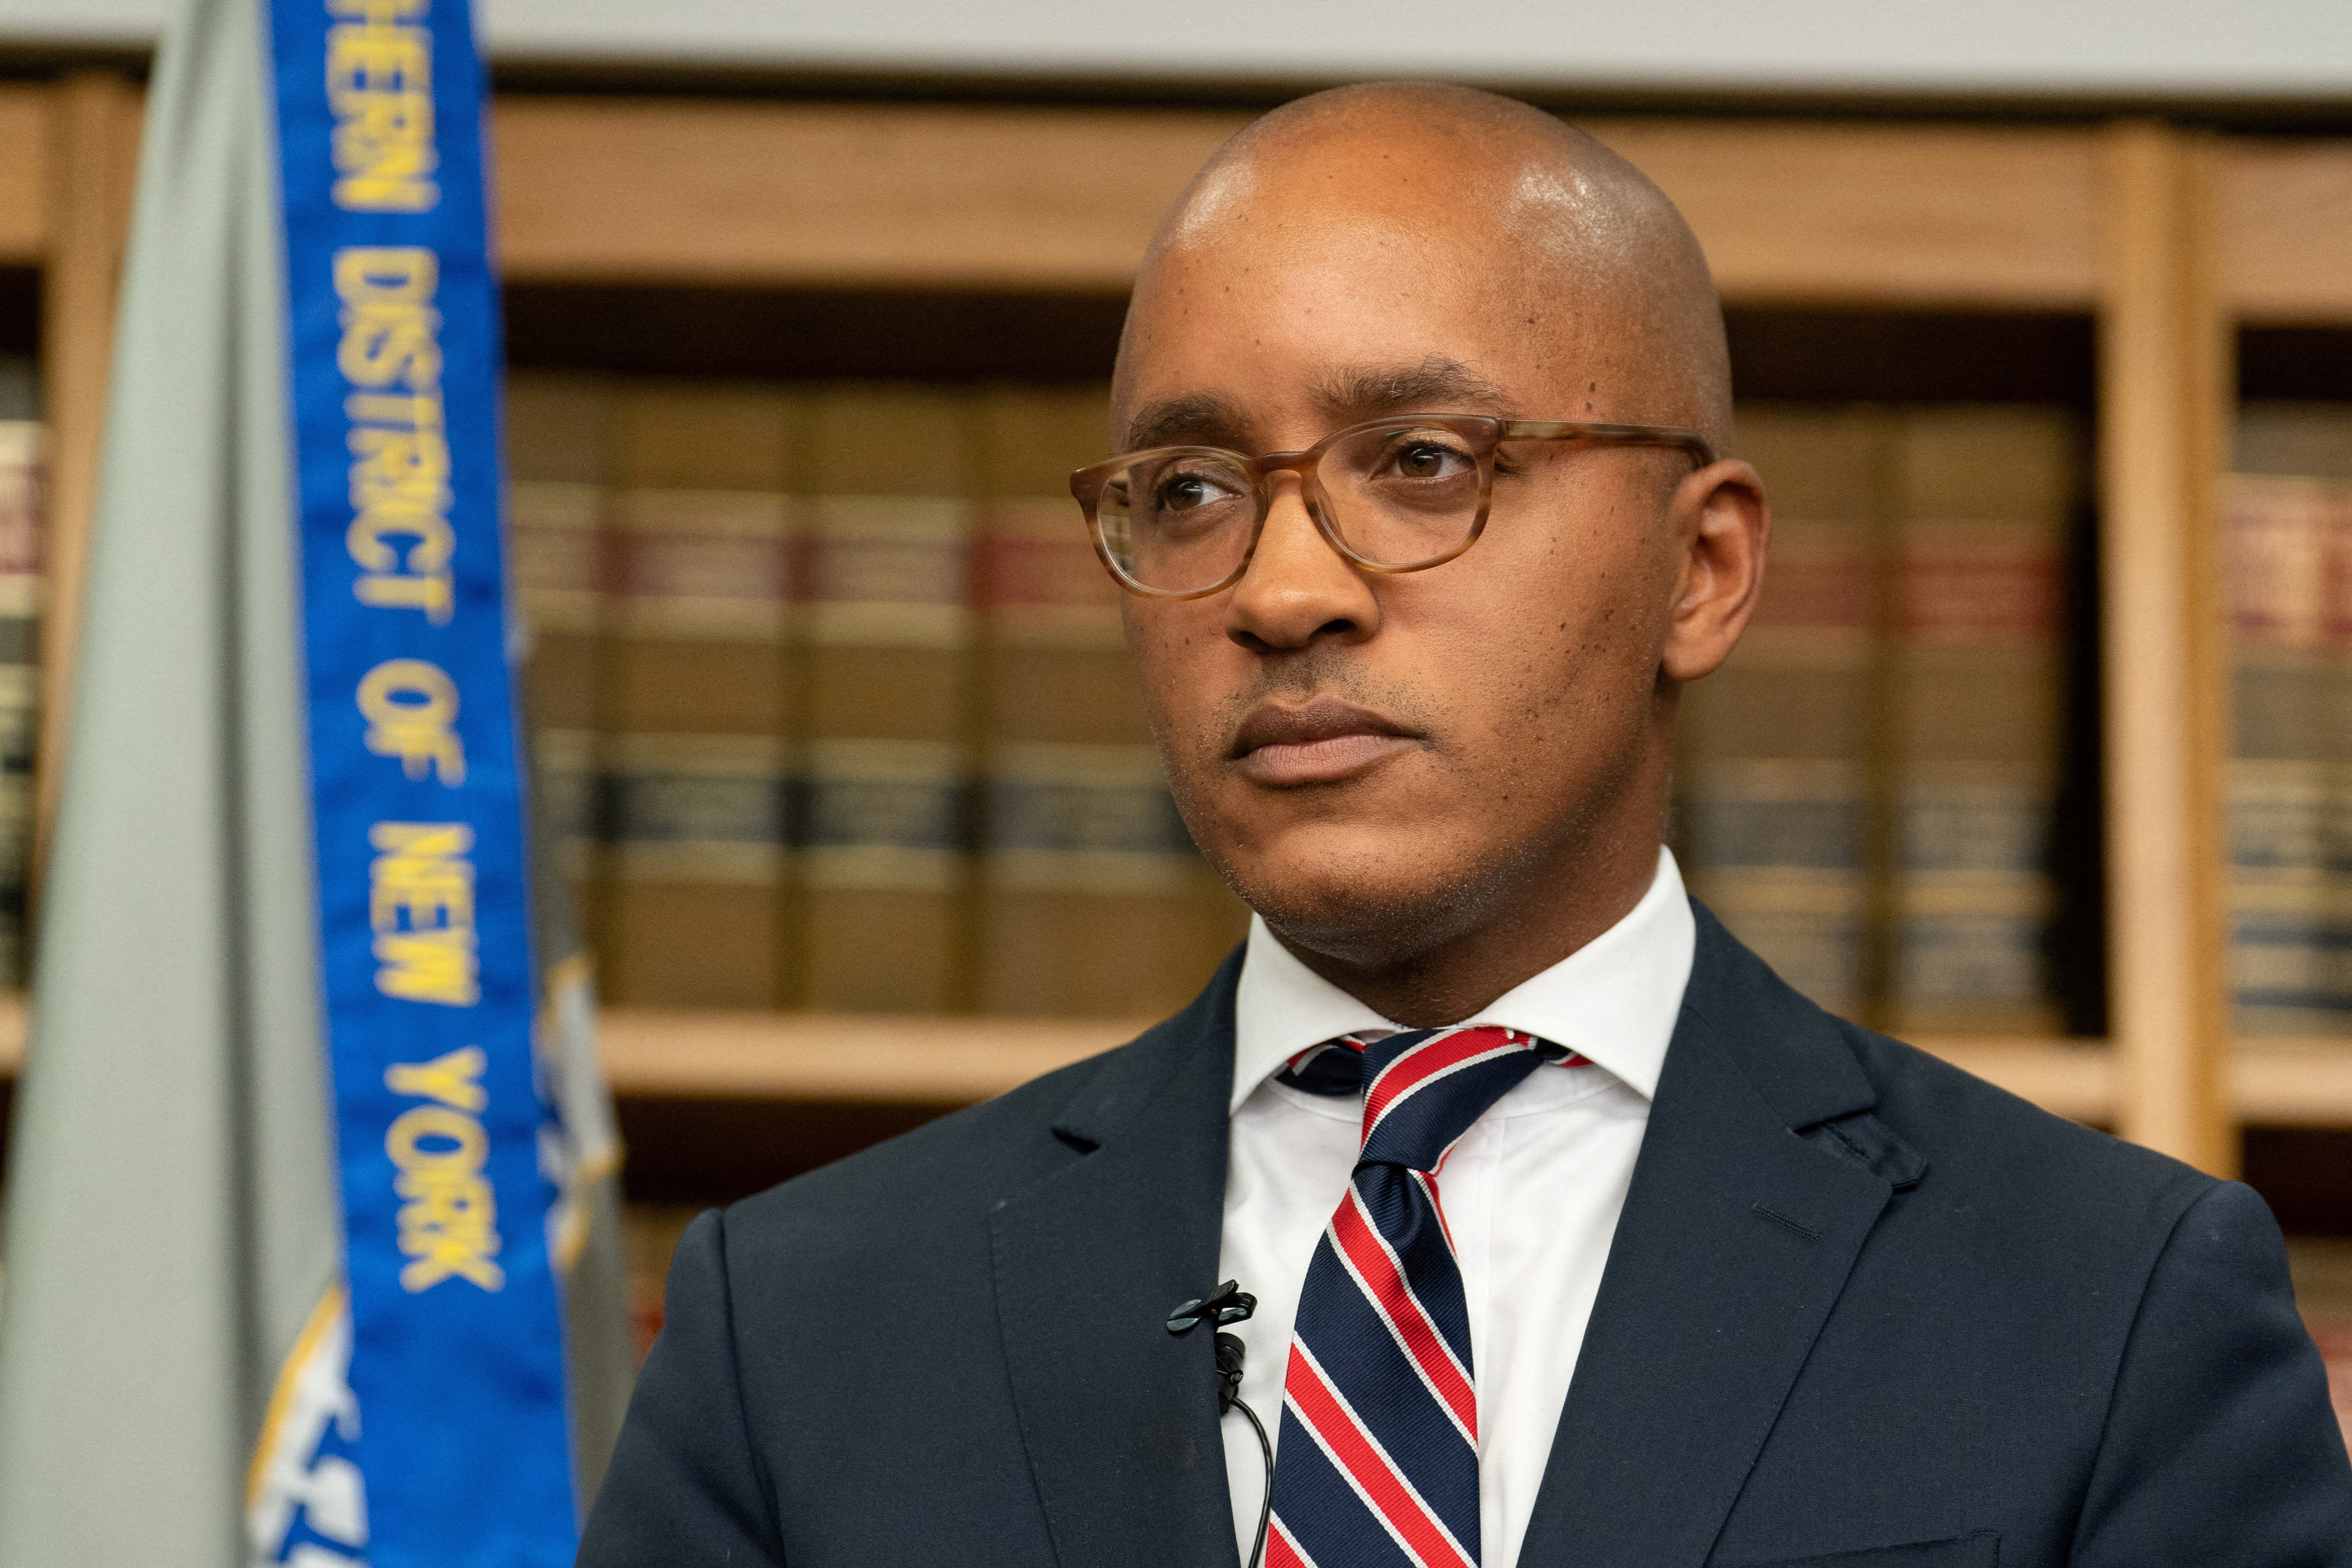 U.S. attorney Damian Williams speaks to the media regarding the indictment of Sam Bankman-Fried, the founder of failed crypto exchange FTX